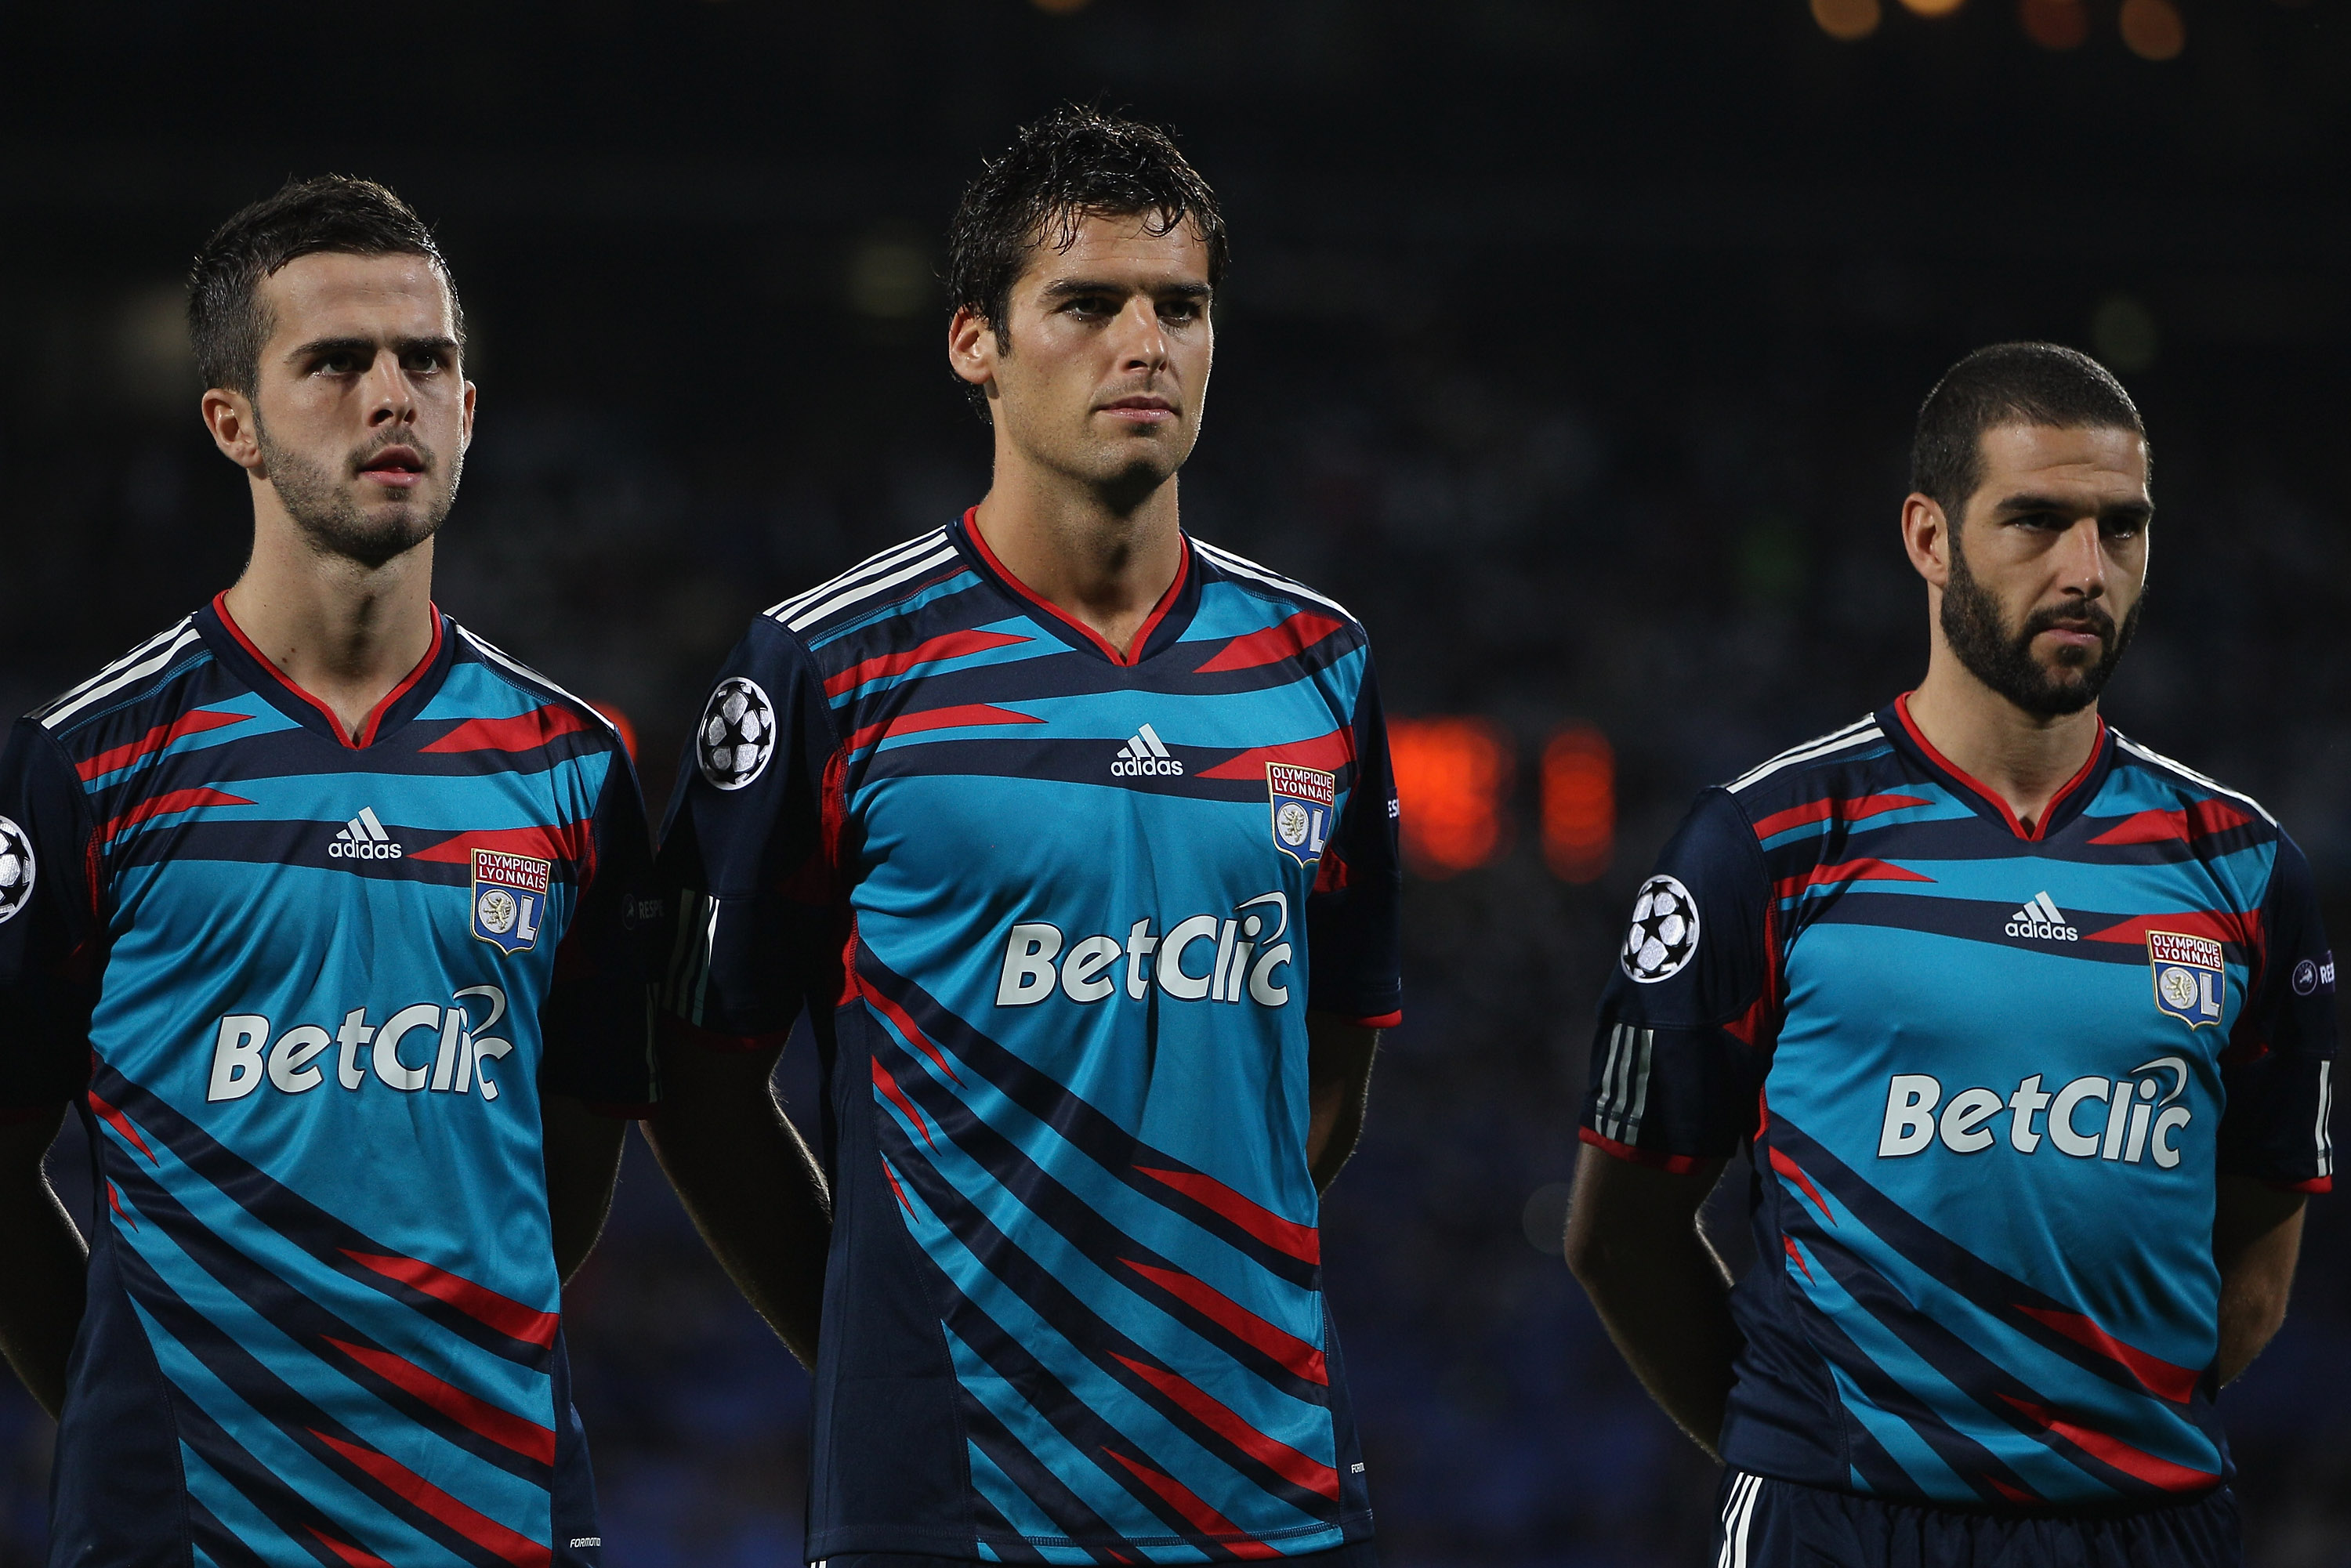 LYON, FRANCE - SEPTEMBER 14:  Miralem Pjanic (l),Yoann Gourcuff (c) and Lisandro (r) of Lyon line up before the UEFA Champions League Group B match between Olympique Lyonnais and FC Schalke 04 at the Stade de Gerland on September 14, 2010 in Lyon, France.